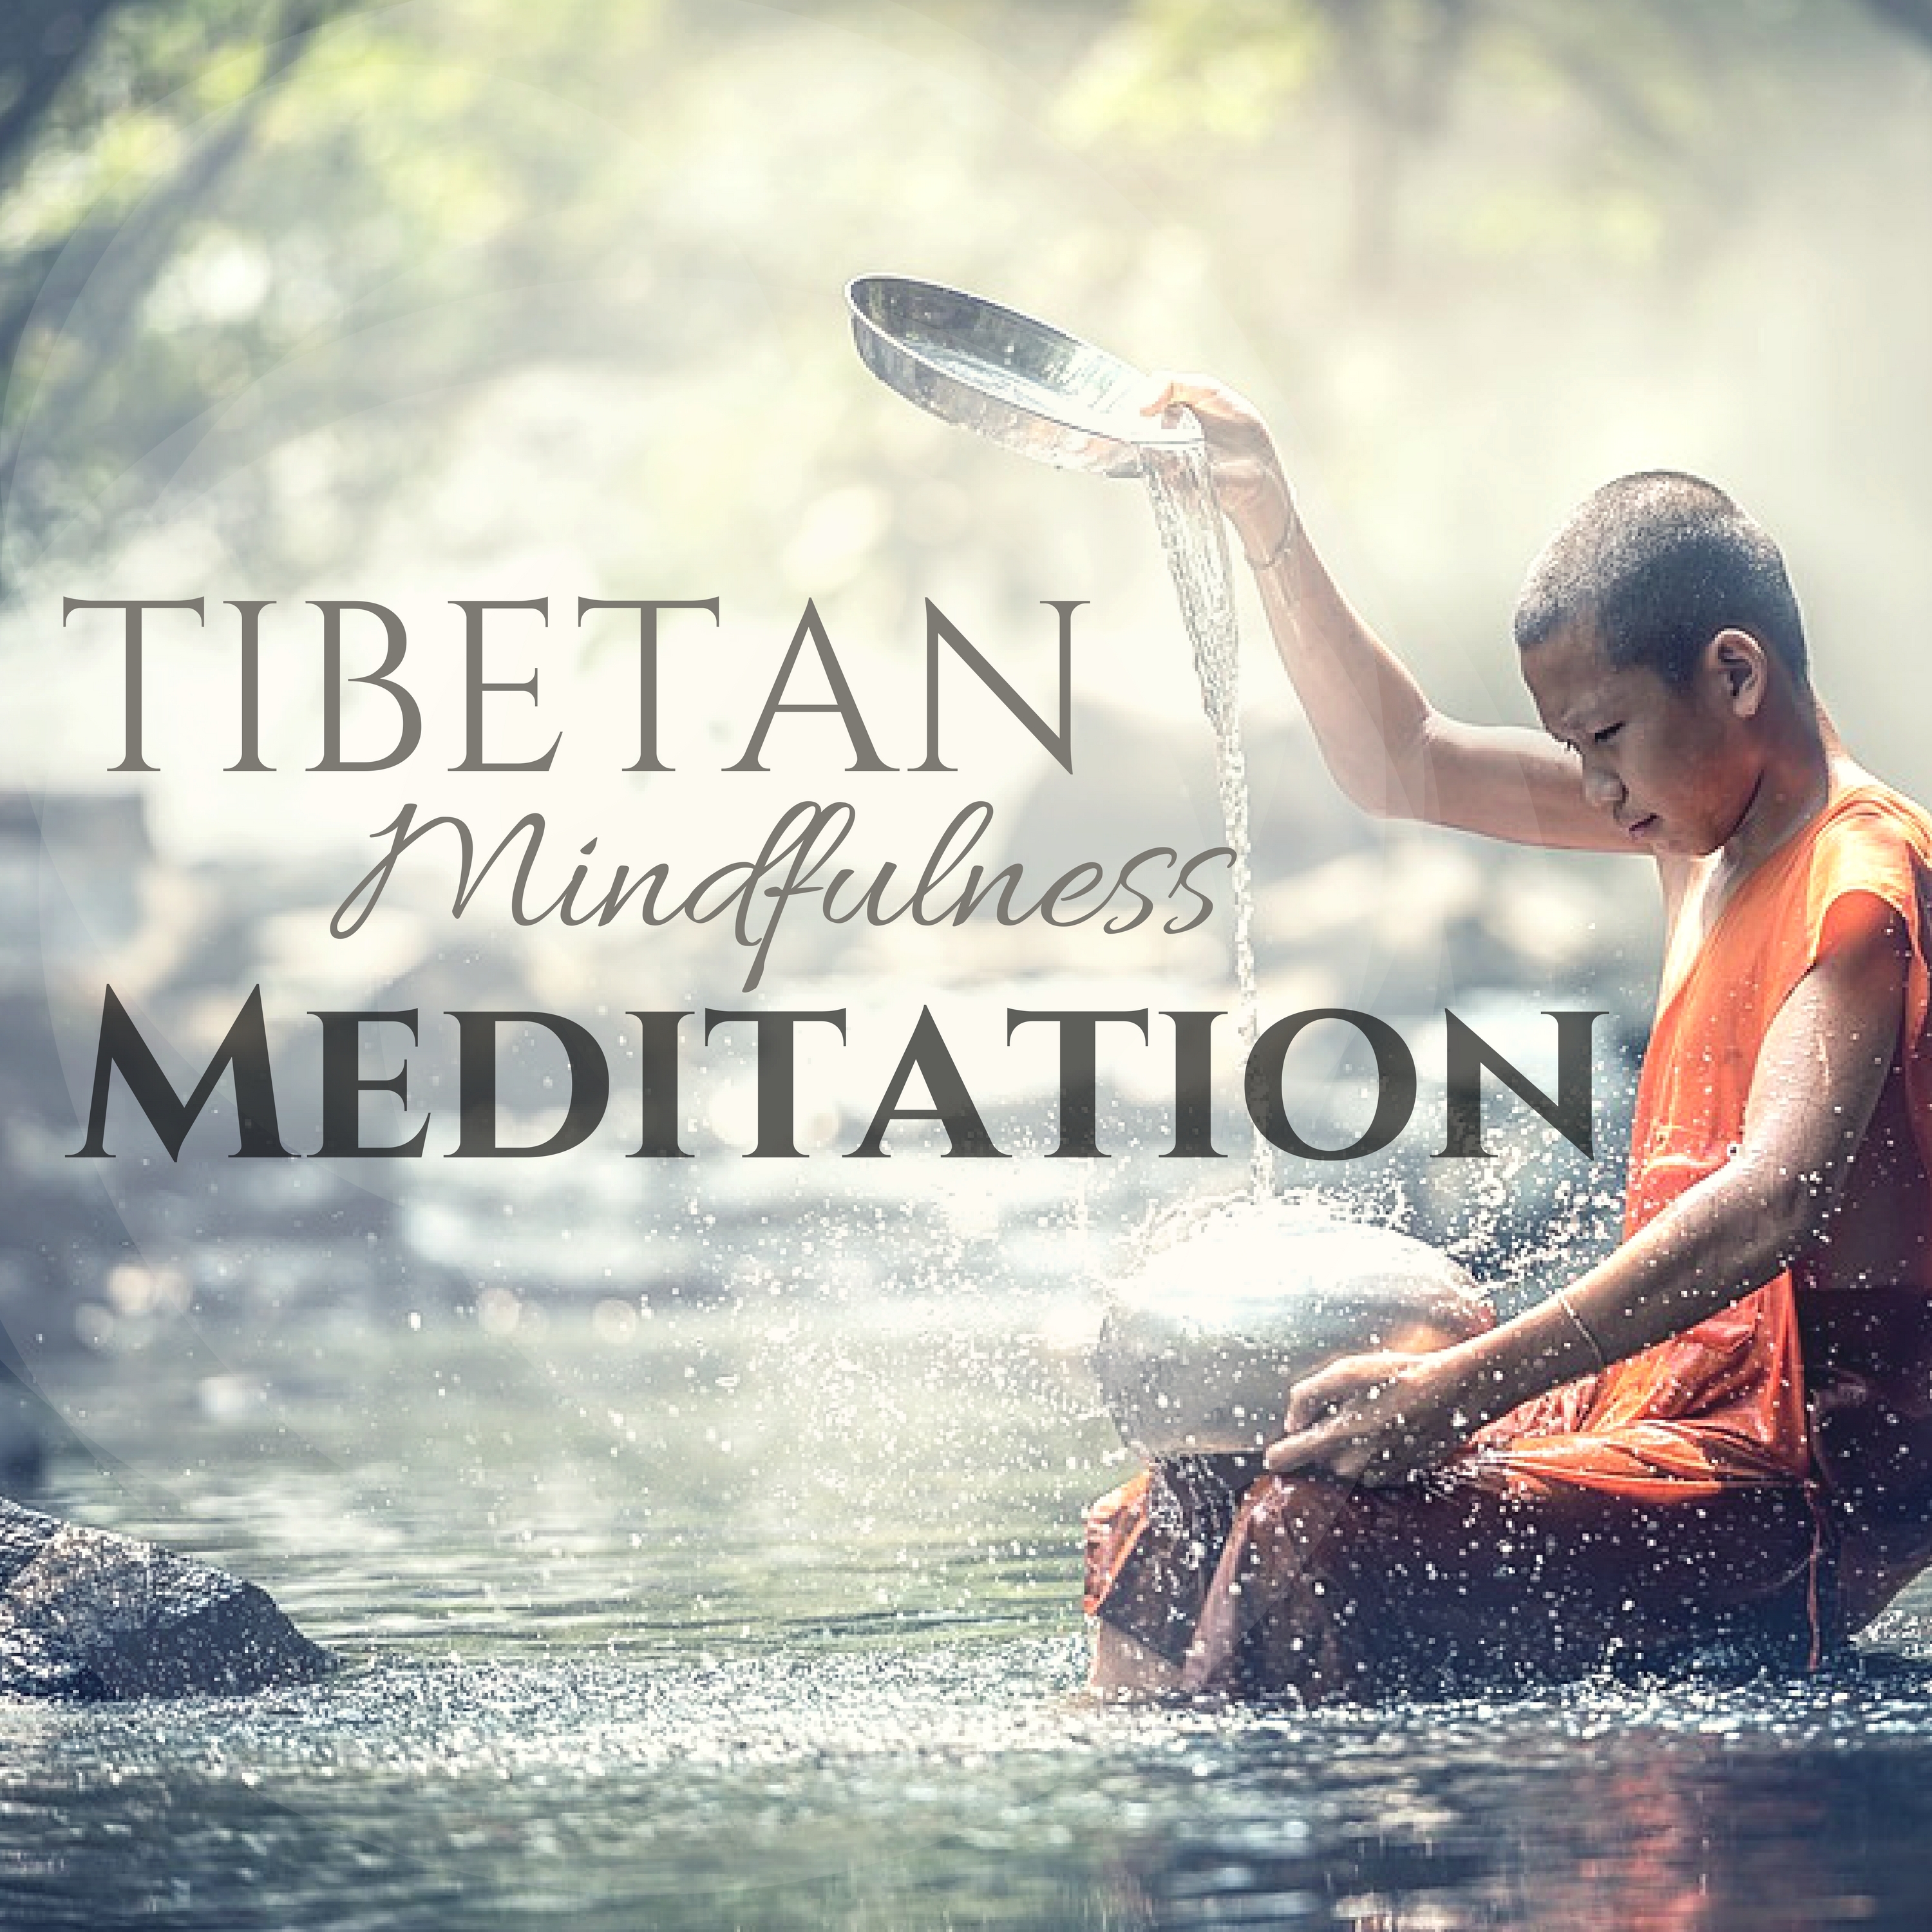 Tibetan Mindfulness Meditation - Oasis Sounds for Deep Relaxation to Become One with Nature